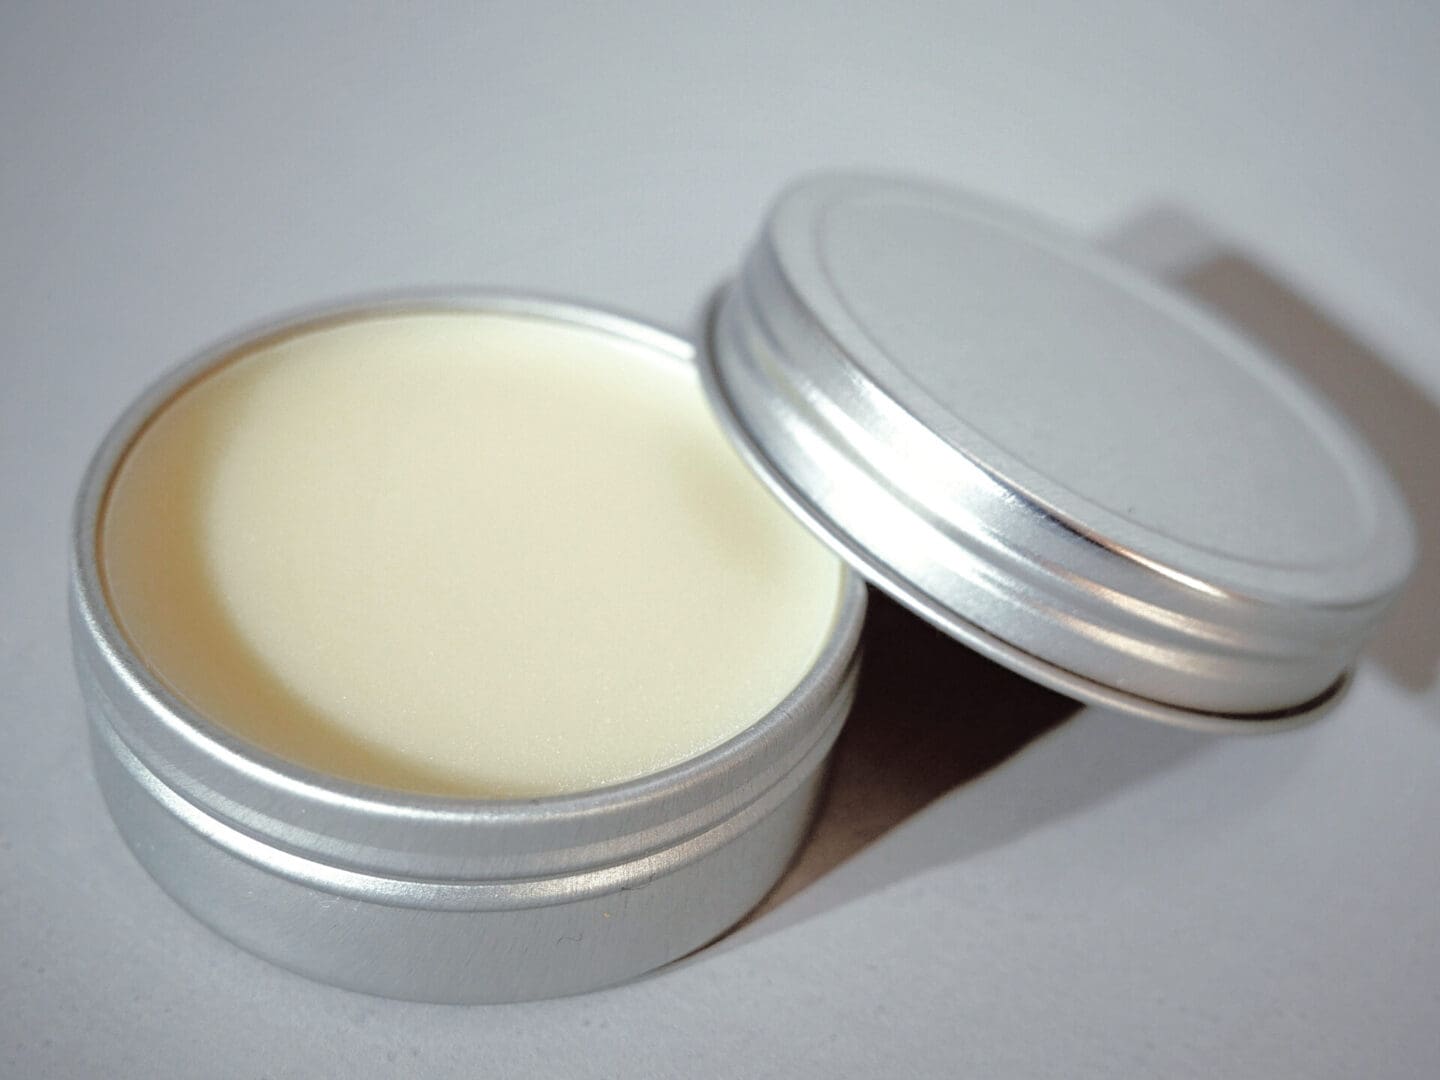 A small tin of lip balm with a lid.